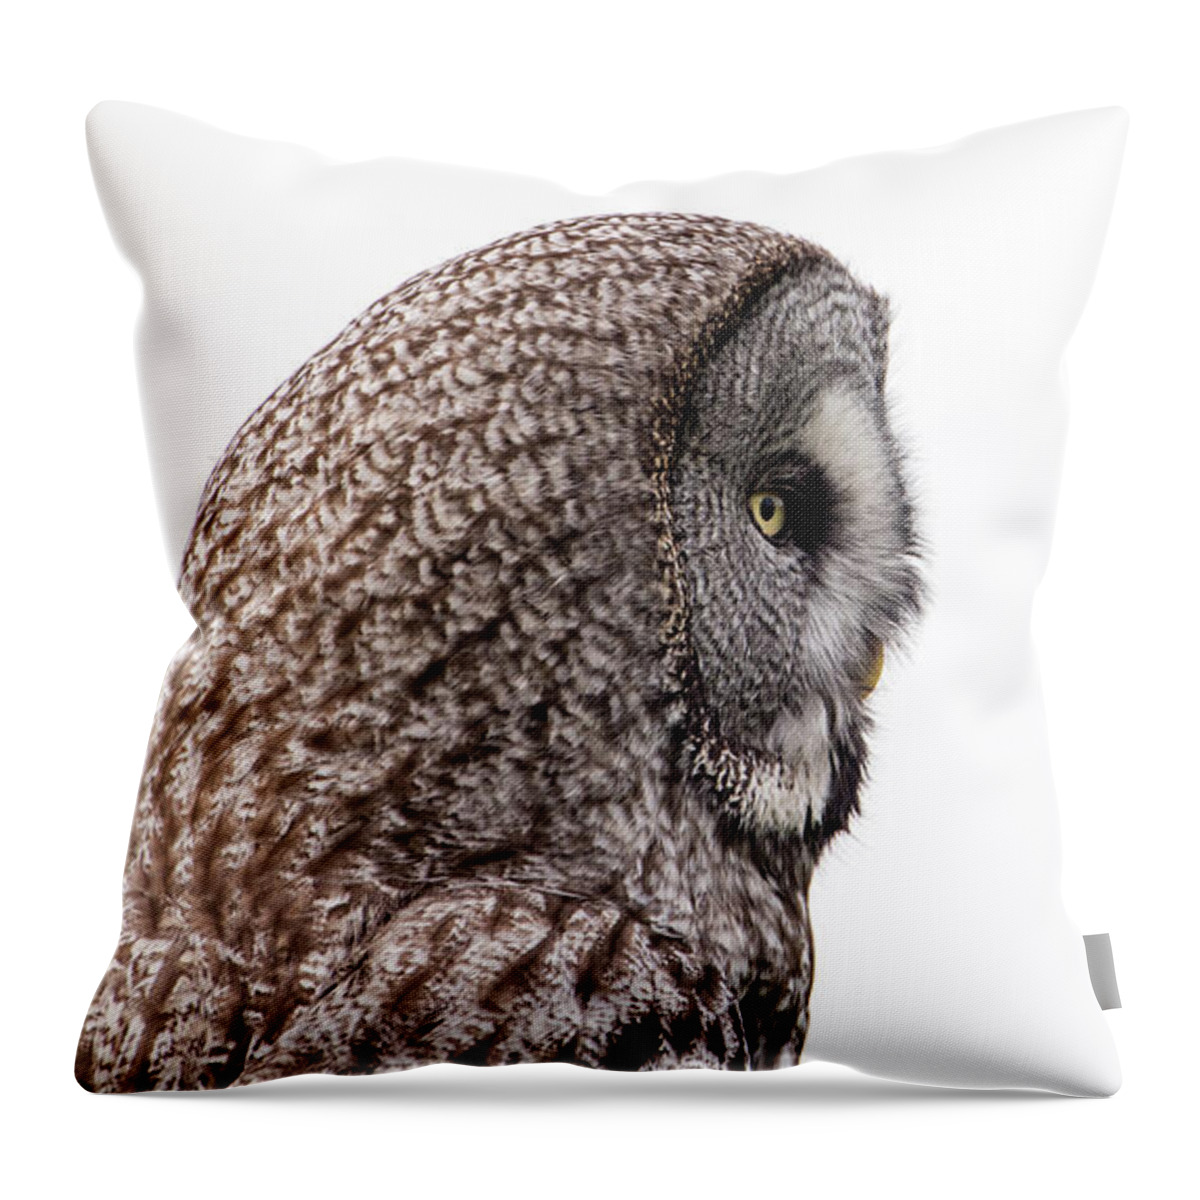 Great Greys Profile On White Throw Pillow featuring the photograph Great Grey's Profile on White by Torbjorn Swenelius